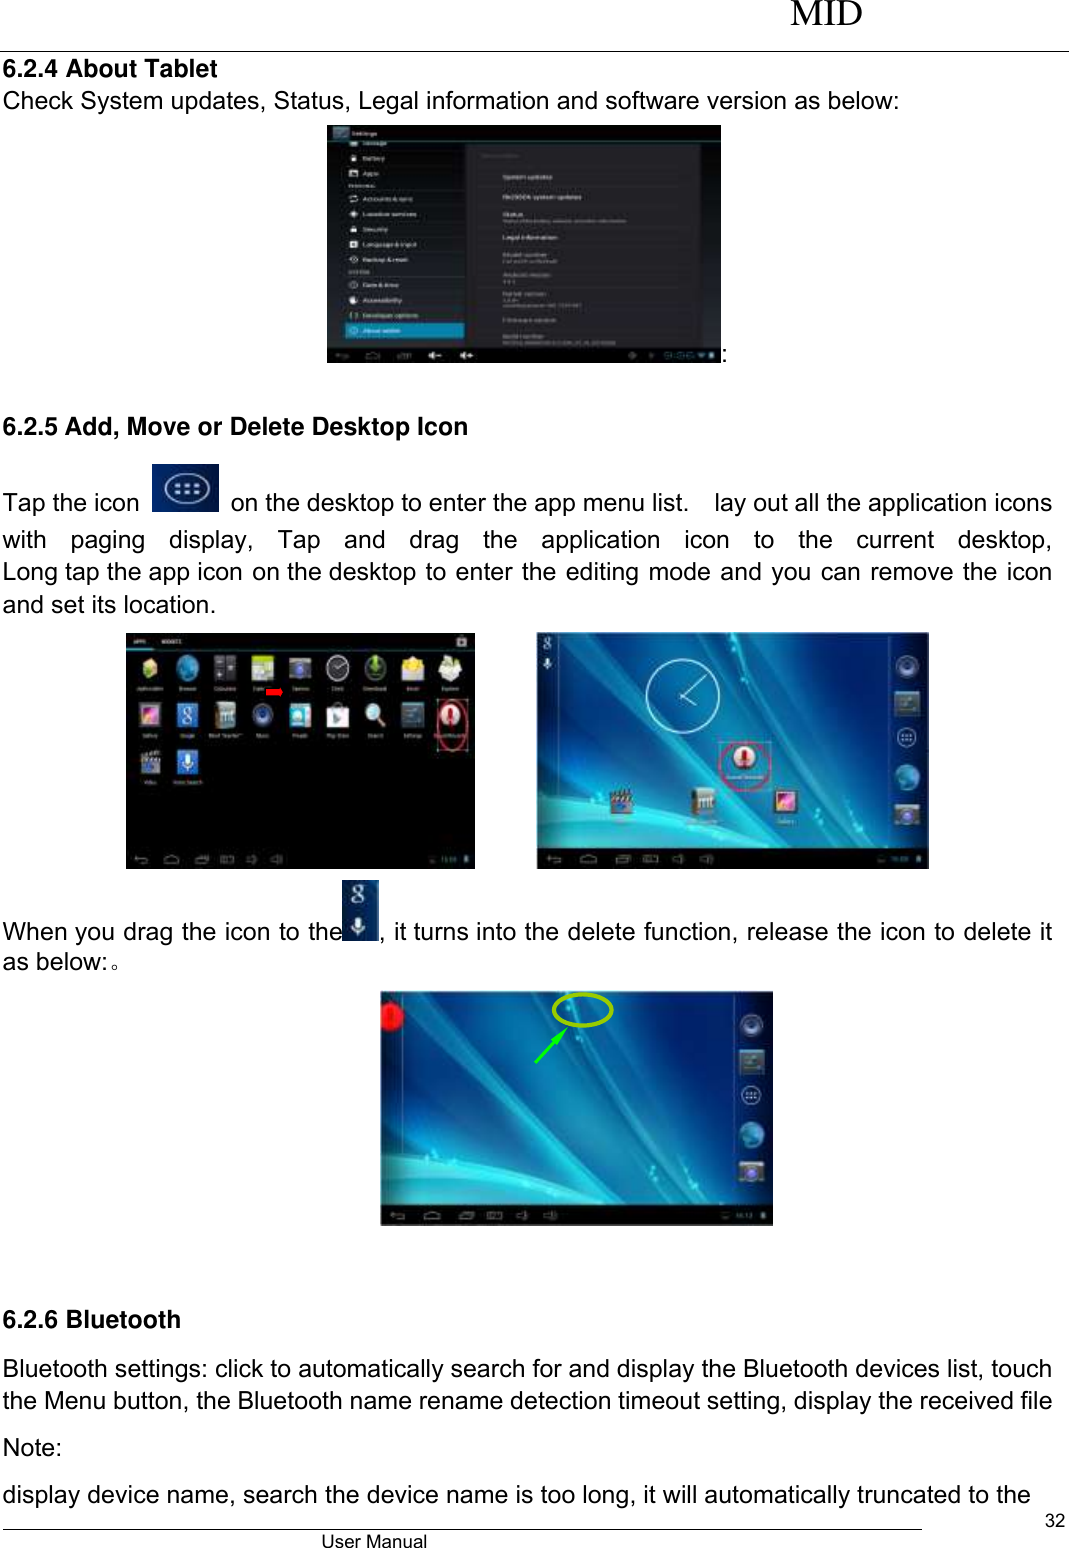      MID                                        User Manual     32 6.2.4 About Tablet Check System updates, Status, Legal information and software version as below: : 6.2.5 Add, Move or Delete Desktop Icon Tap the icon    on the desktop to enter the app menu list.    lay out all the application icons with  paging  display,  Tap  and  drag  the  application  icon  to  the  current  desktop, Long tap the app icon on the desktop to enter the editing mode and you can remove the icon and set its location.        When you drag the icon to the , it turns into the delete function, release the icon to delete it as below:。   6.2.6 Bluetooth Bluetooth settings: click to automatically search for and display the Bluetooth devices list, touch the Menu button, the Bluetooth name rename detection timeout setting, display the received file Note: display device name, search the device name is too long, it will automatically truncated to the 